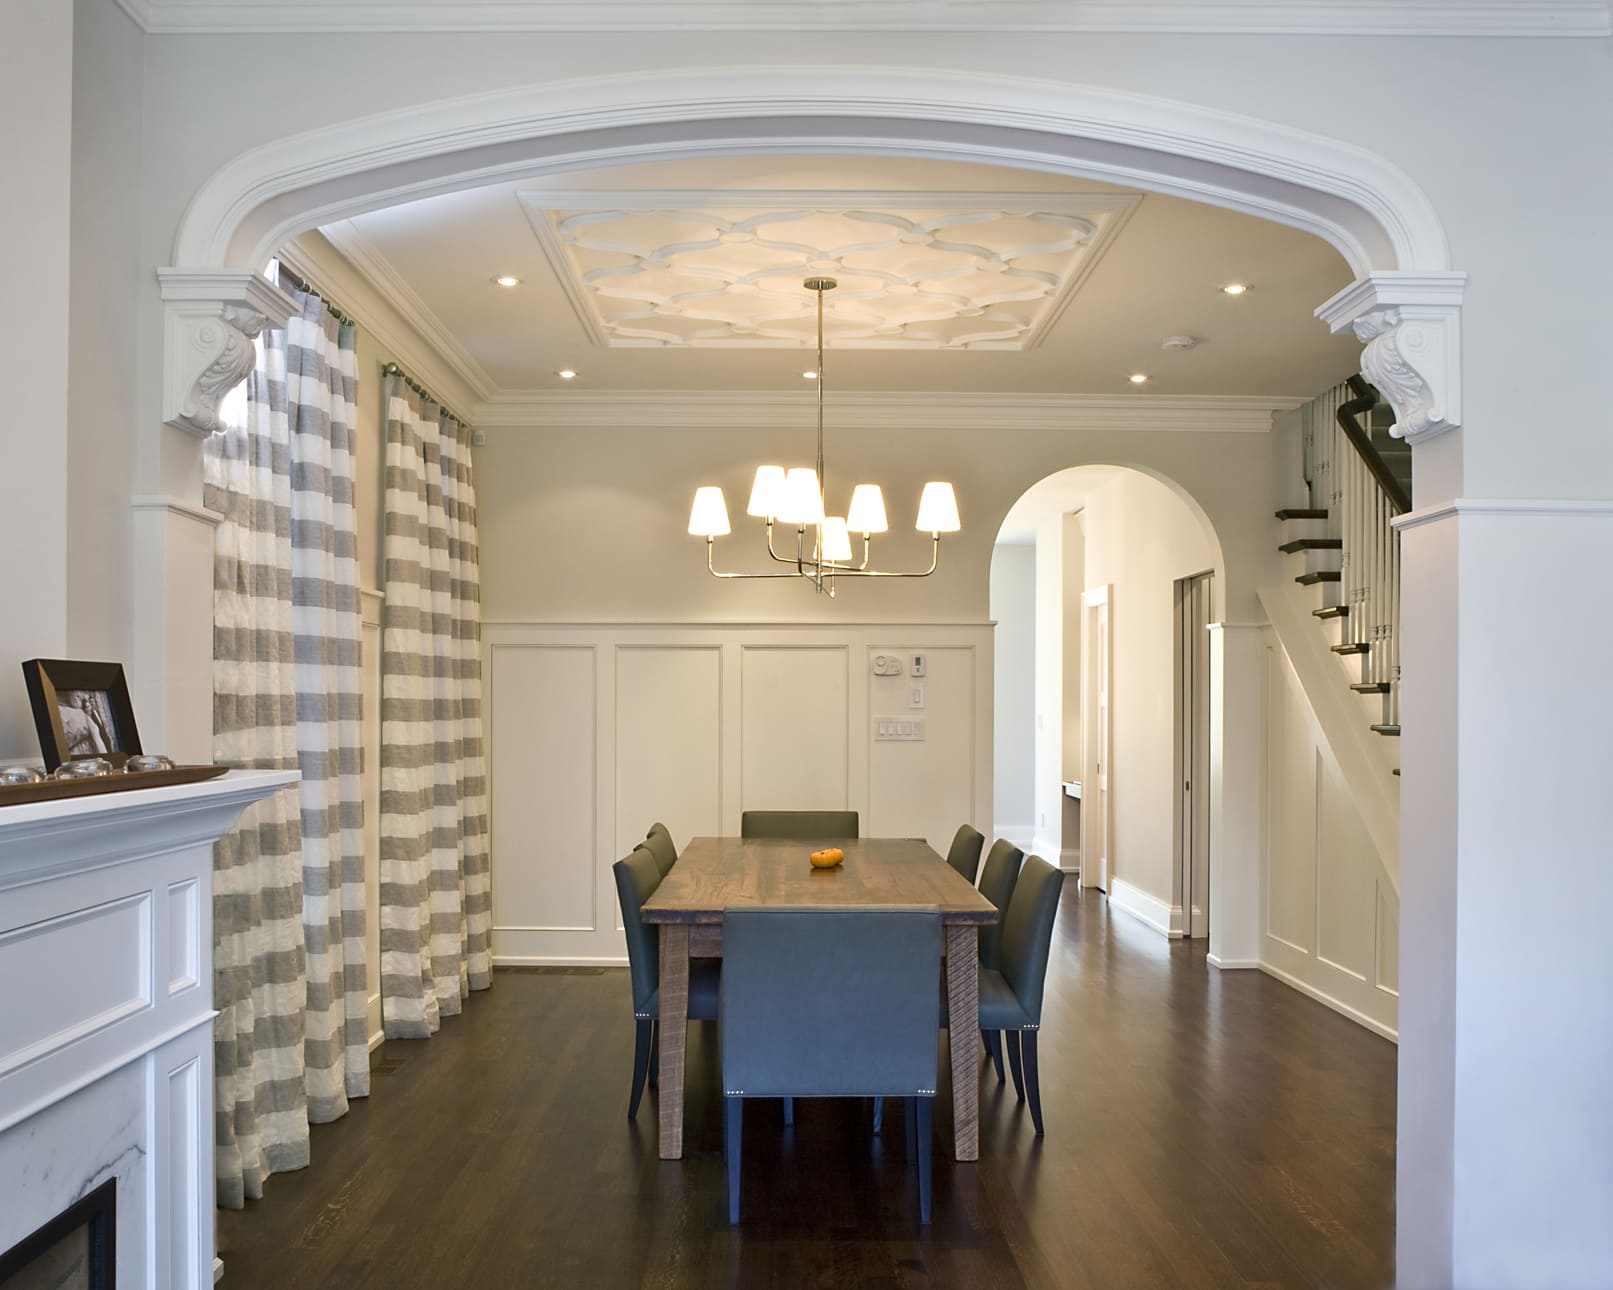 Dining Room Area With Rectangular Table and Chairs in Center. Chandelier Hanging Light Fixture Drops from Ceiling Above With Archway